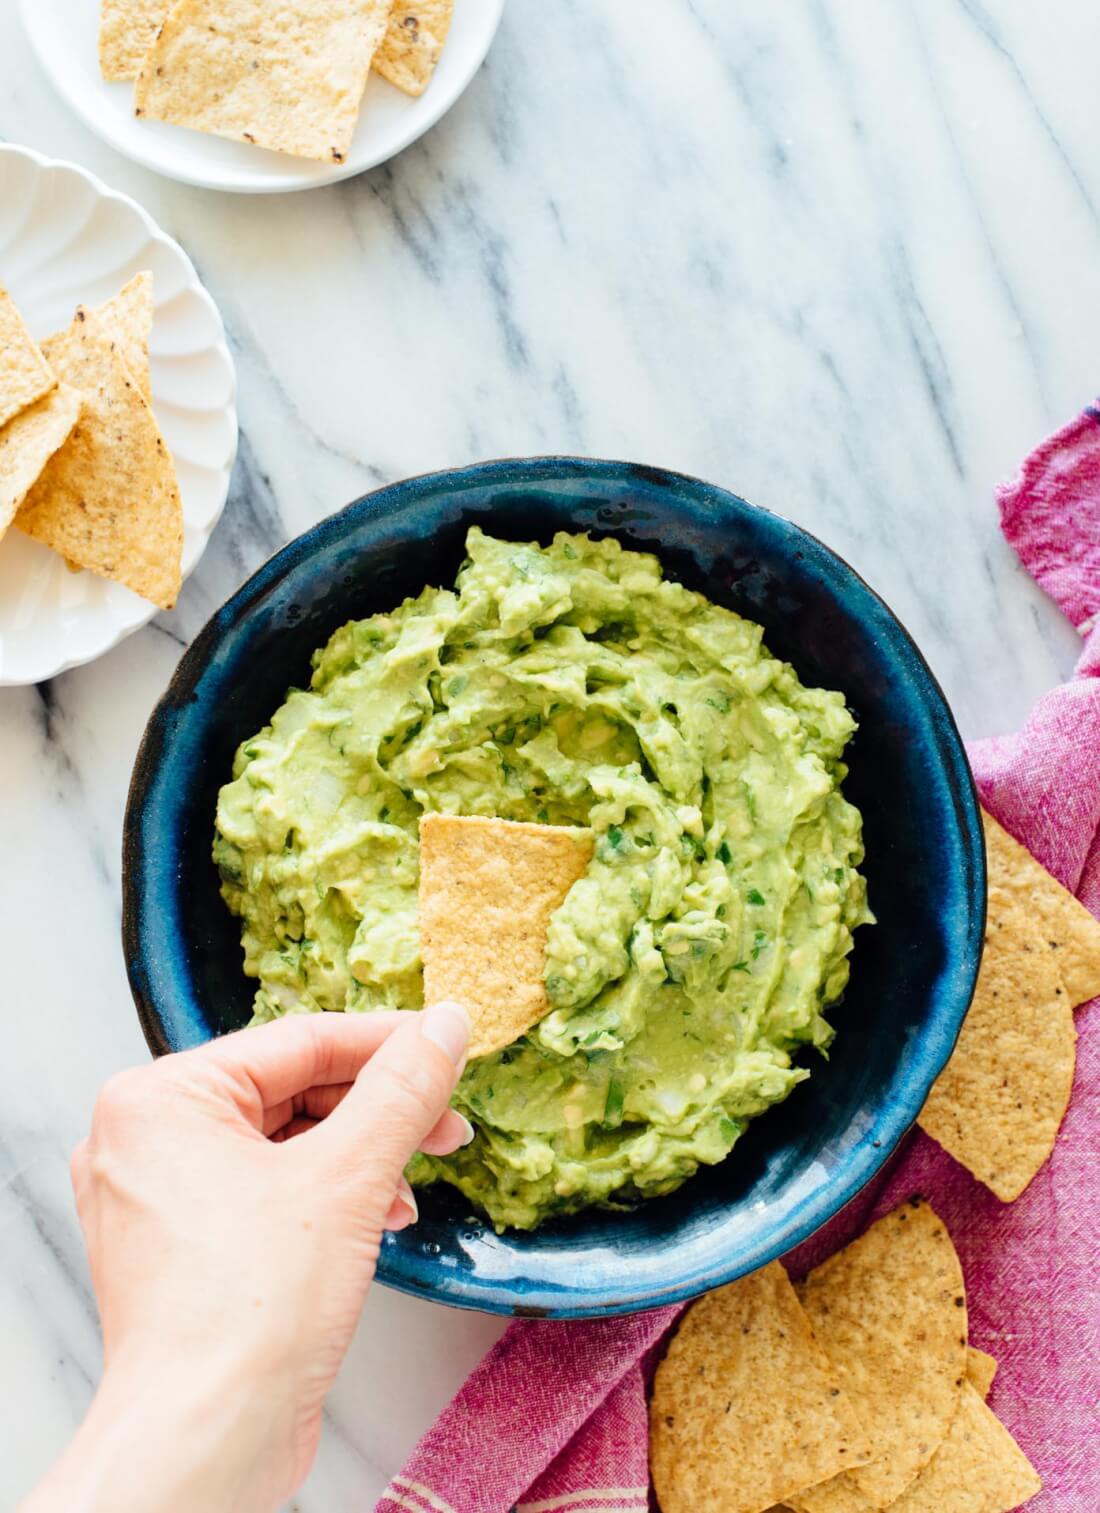 Truly the best guacamole recipe. It's so easy to make with these simple tips! cookieandkate.com